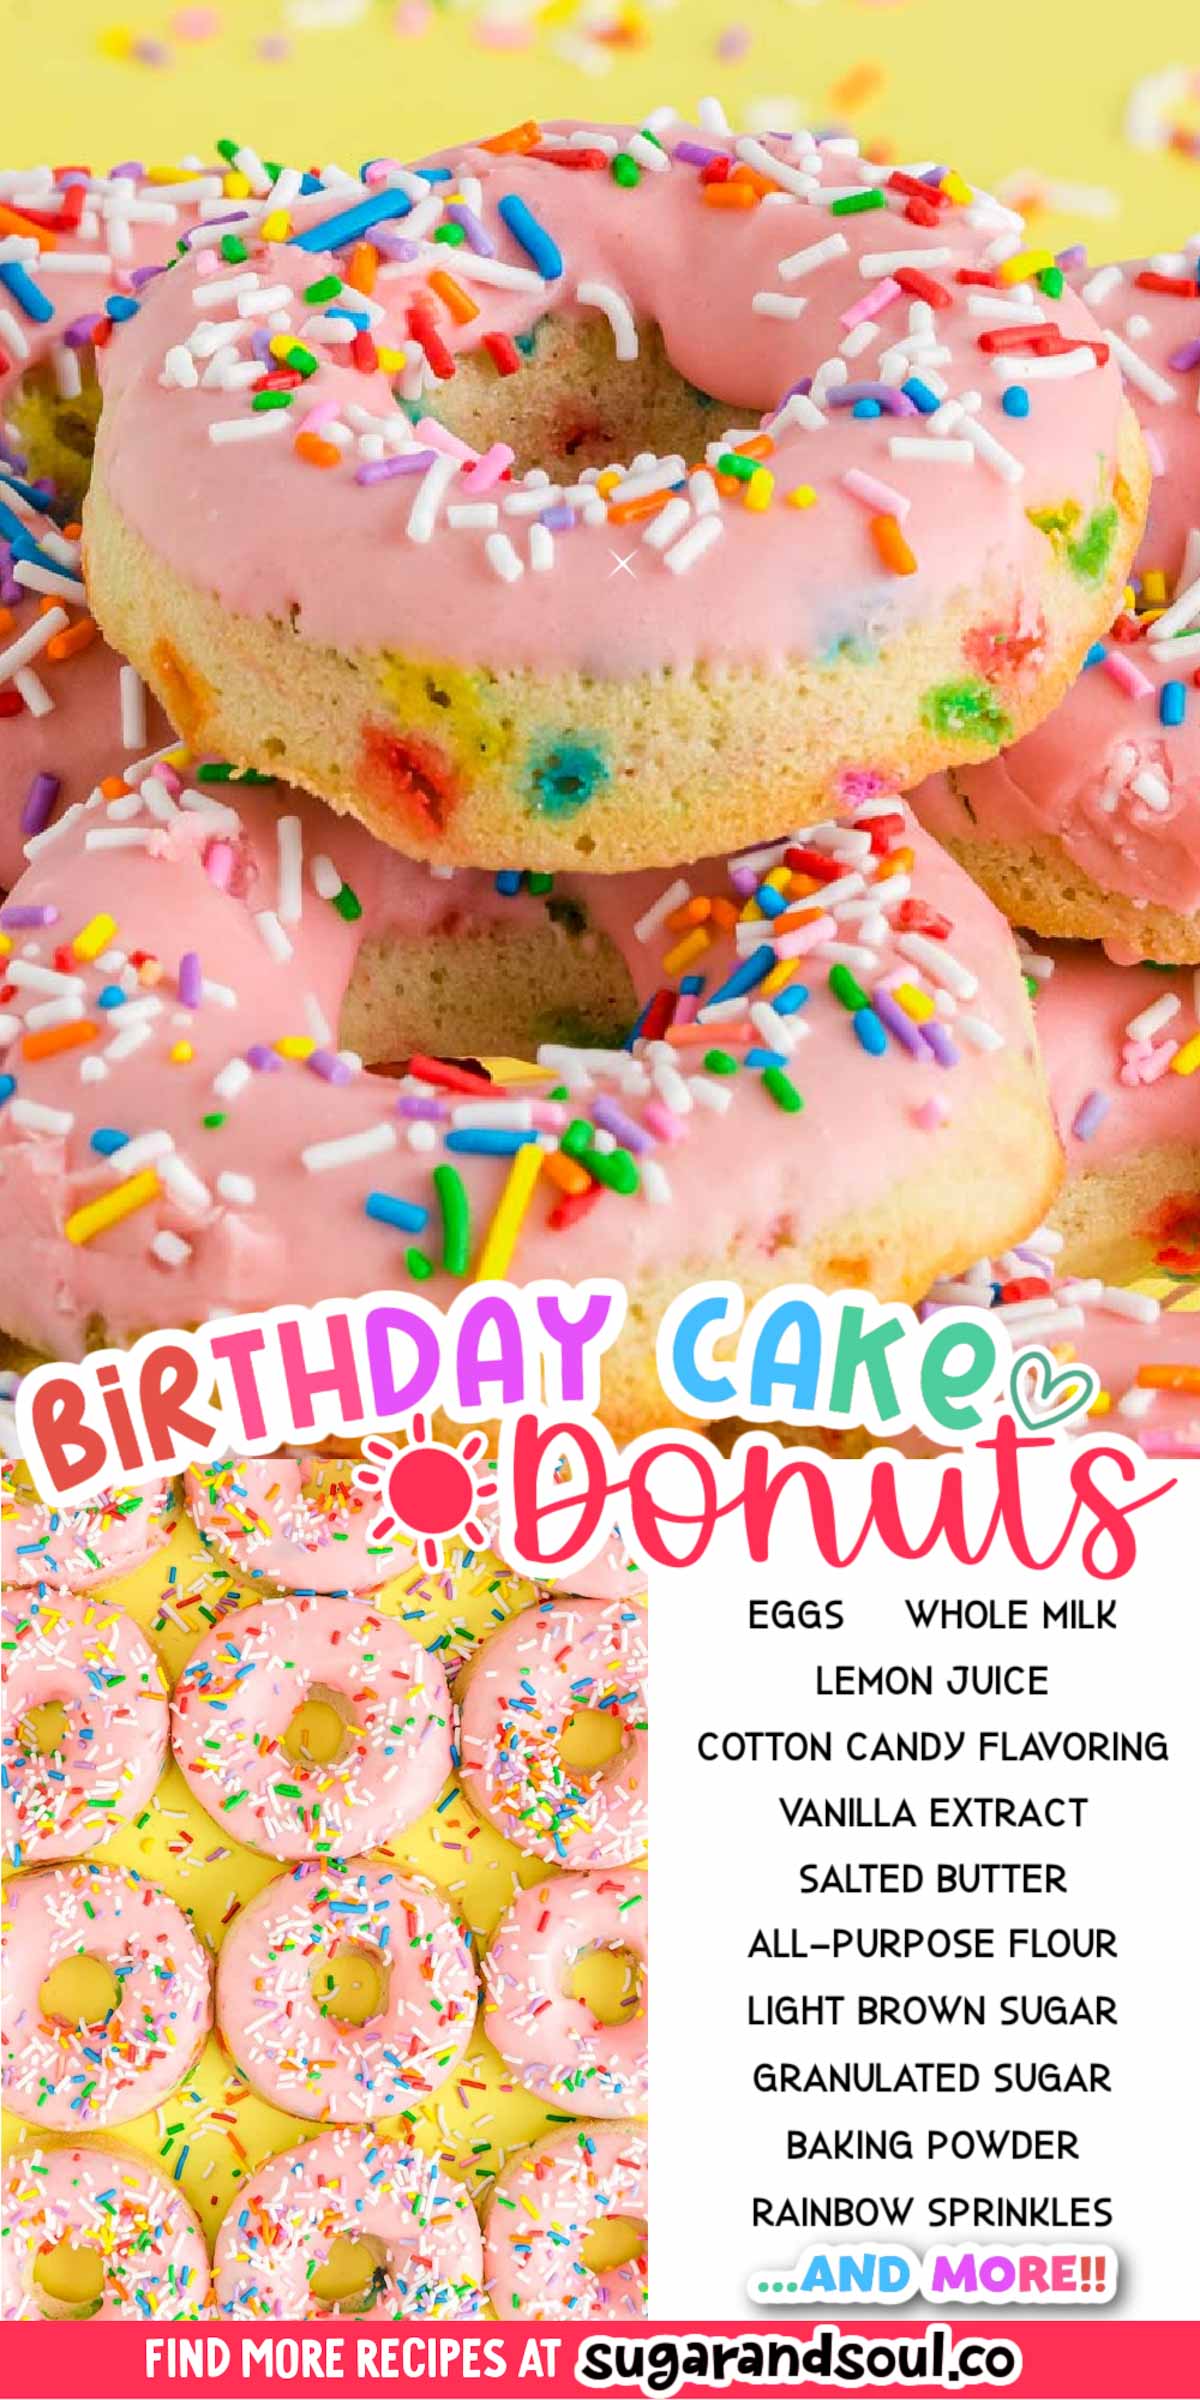 These Happy Birthday Donuts combine pantry staple ingredients with rainbow sprinkles and cotton candy flavoring to create light and fluffy glazed donuts! Serve up just under two dozen homemade donuts in only 25 minutes! via @sugarandsoulco